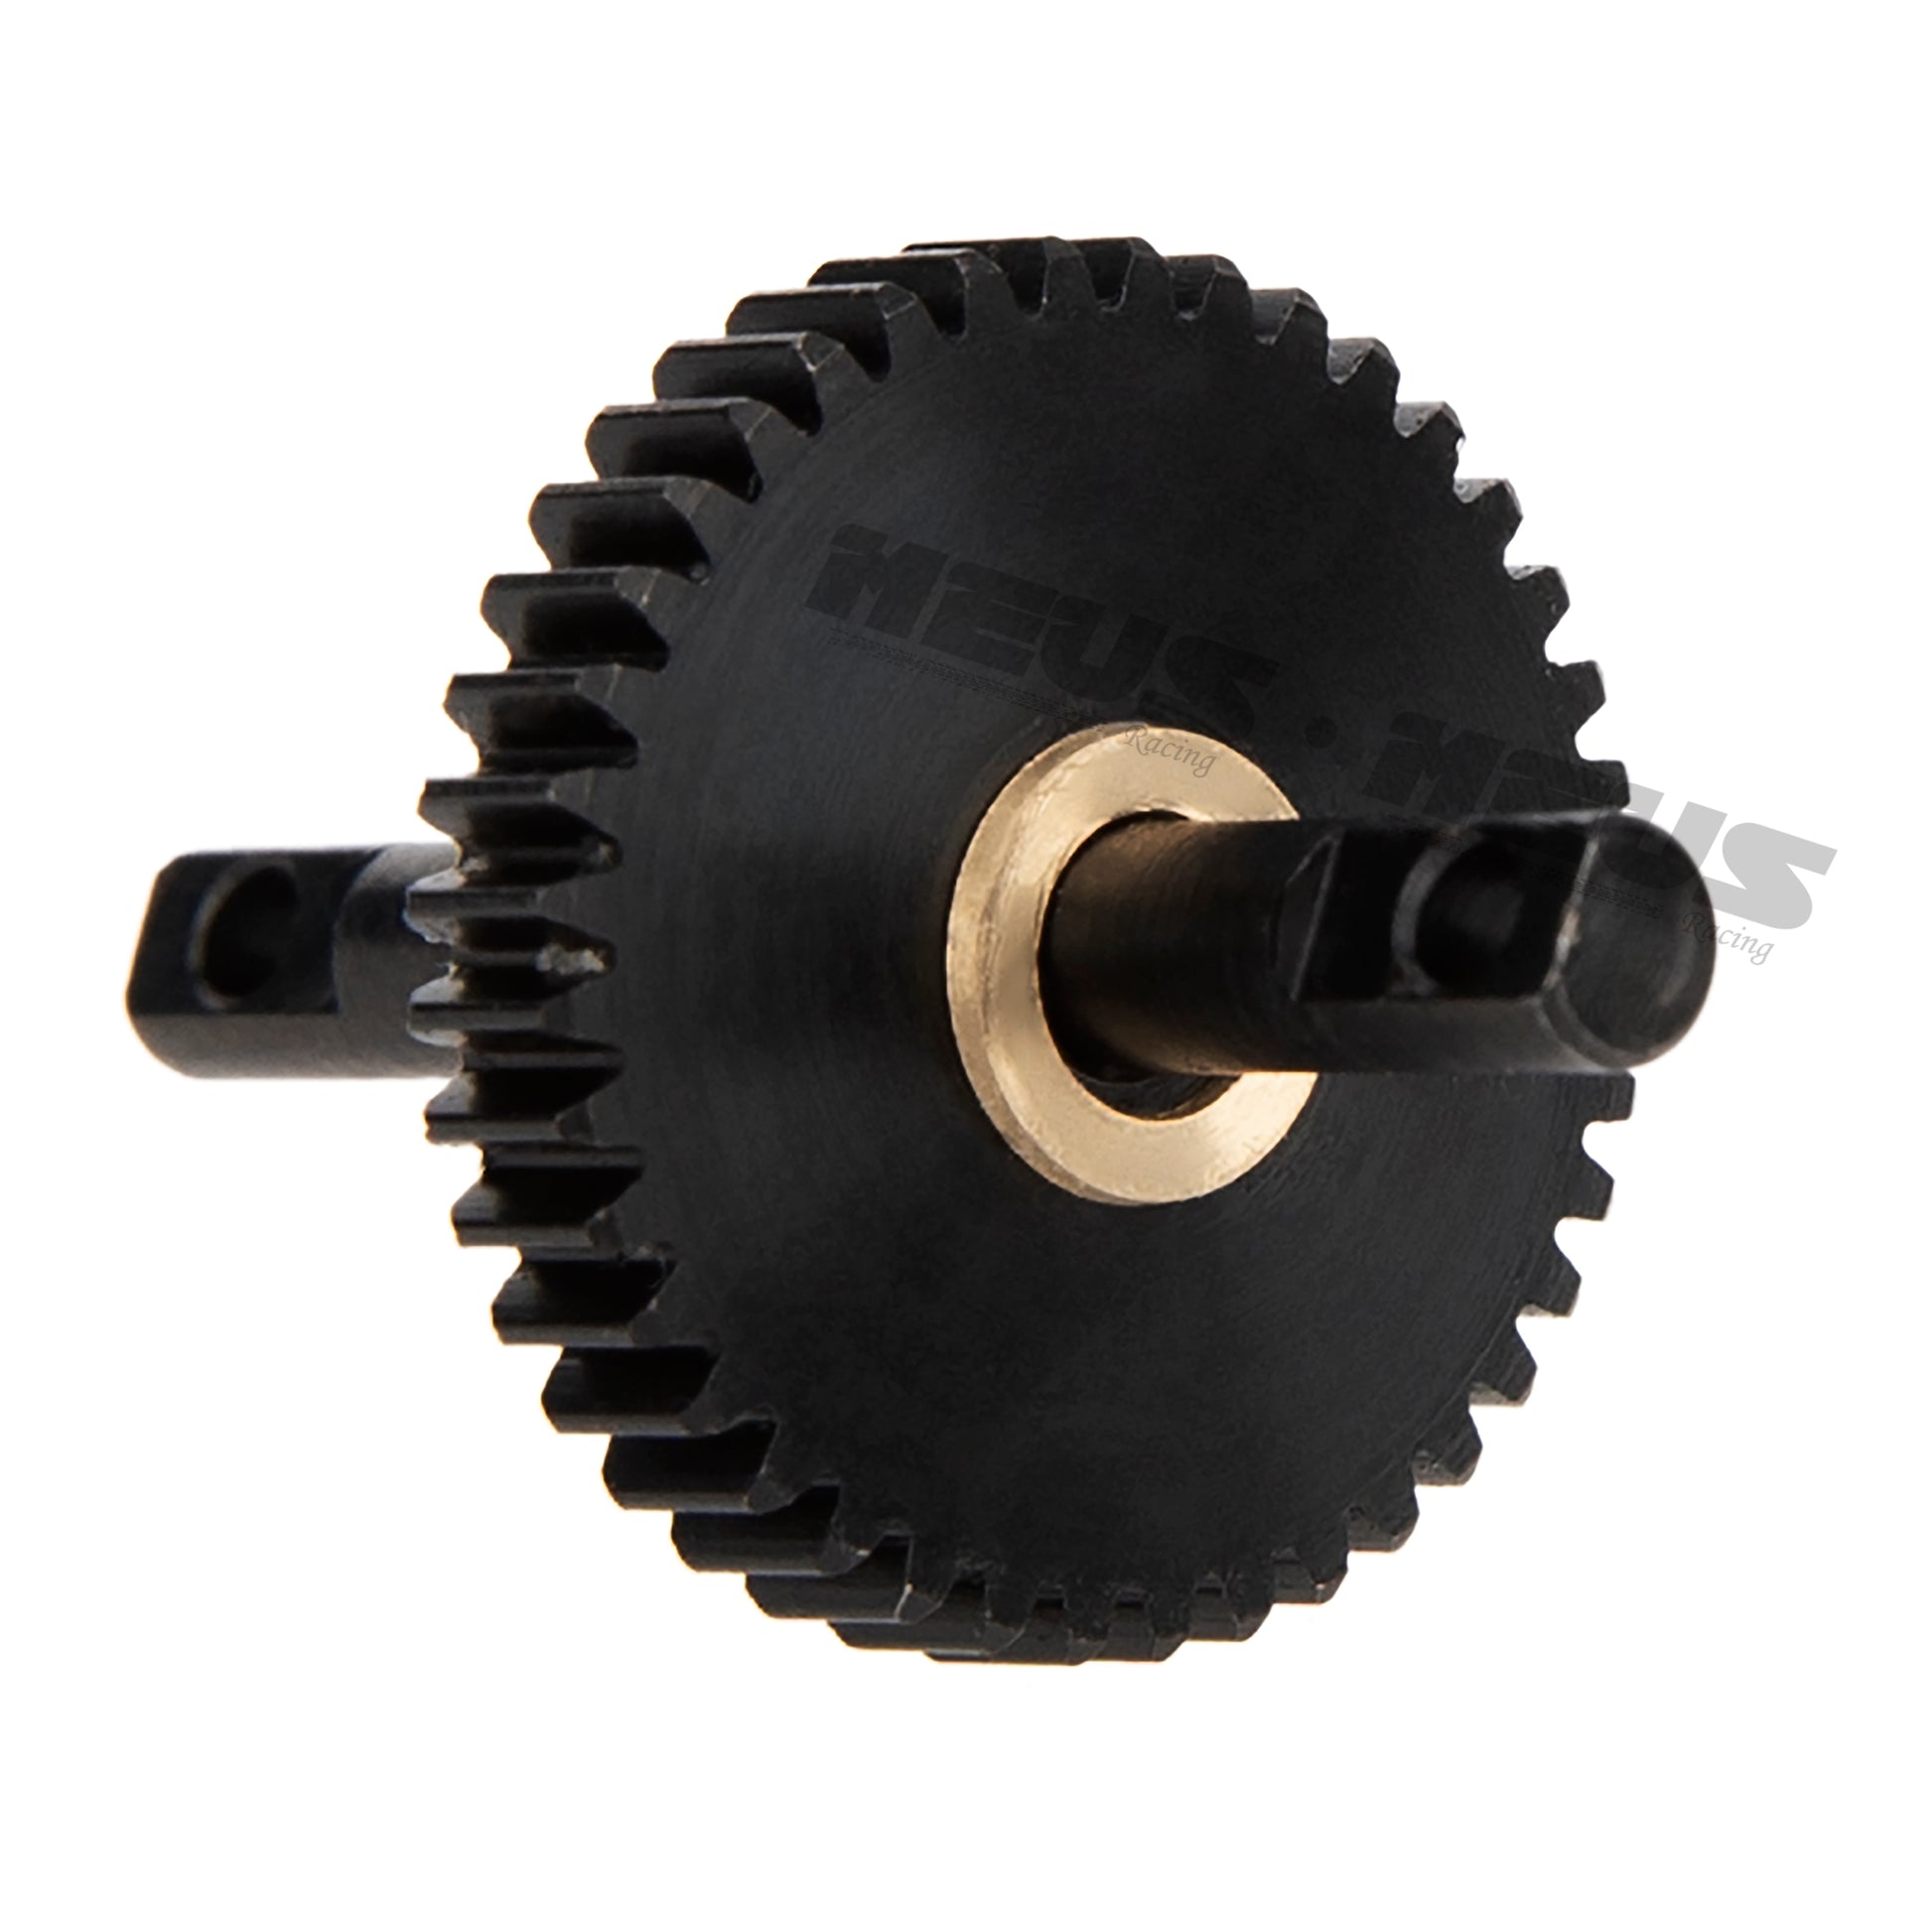 16.61:1 Transmission gears for TRX4M